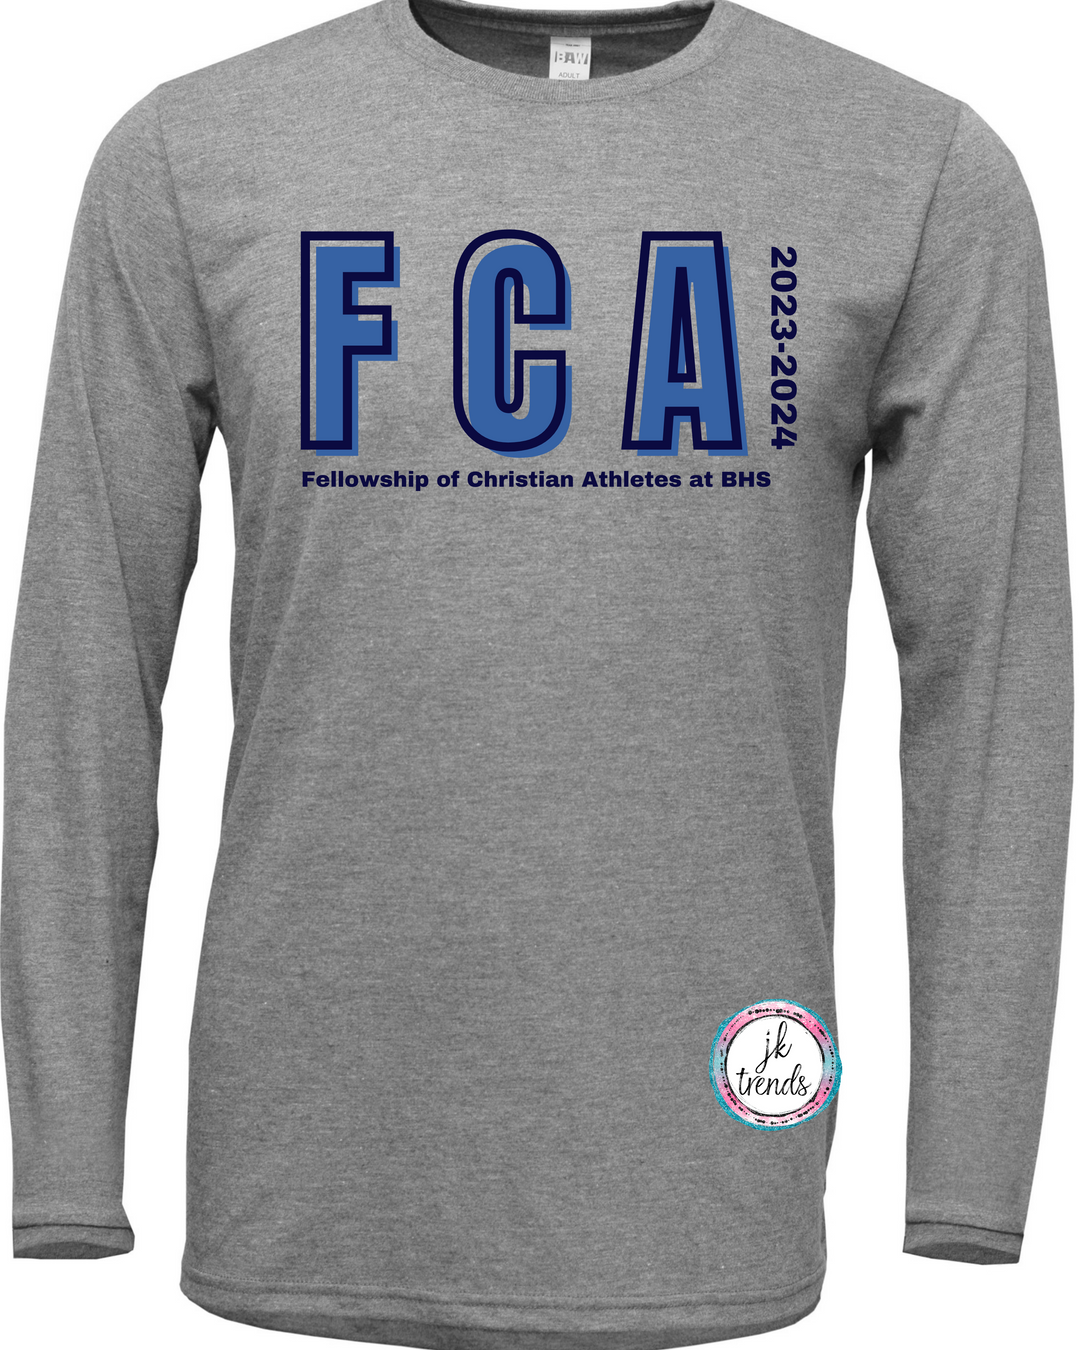 FCA Outlined Drifit Long Sleeve Shirt